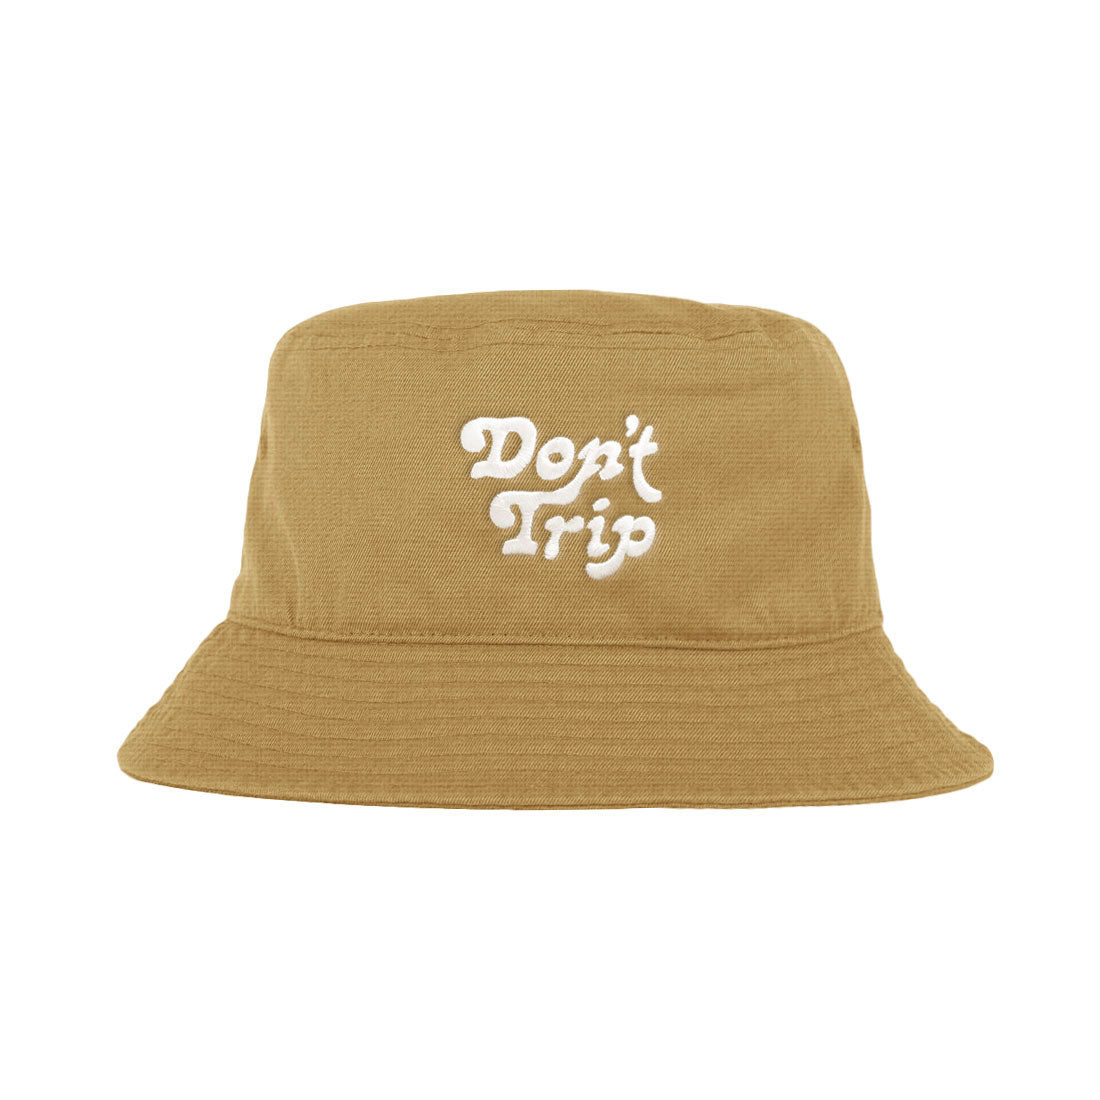 Free & Easy Don't Trip Canvas Bucket Hat in mustard with white Don't Trip embroidery on a white background - Free & Easy